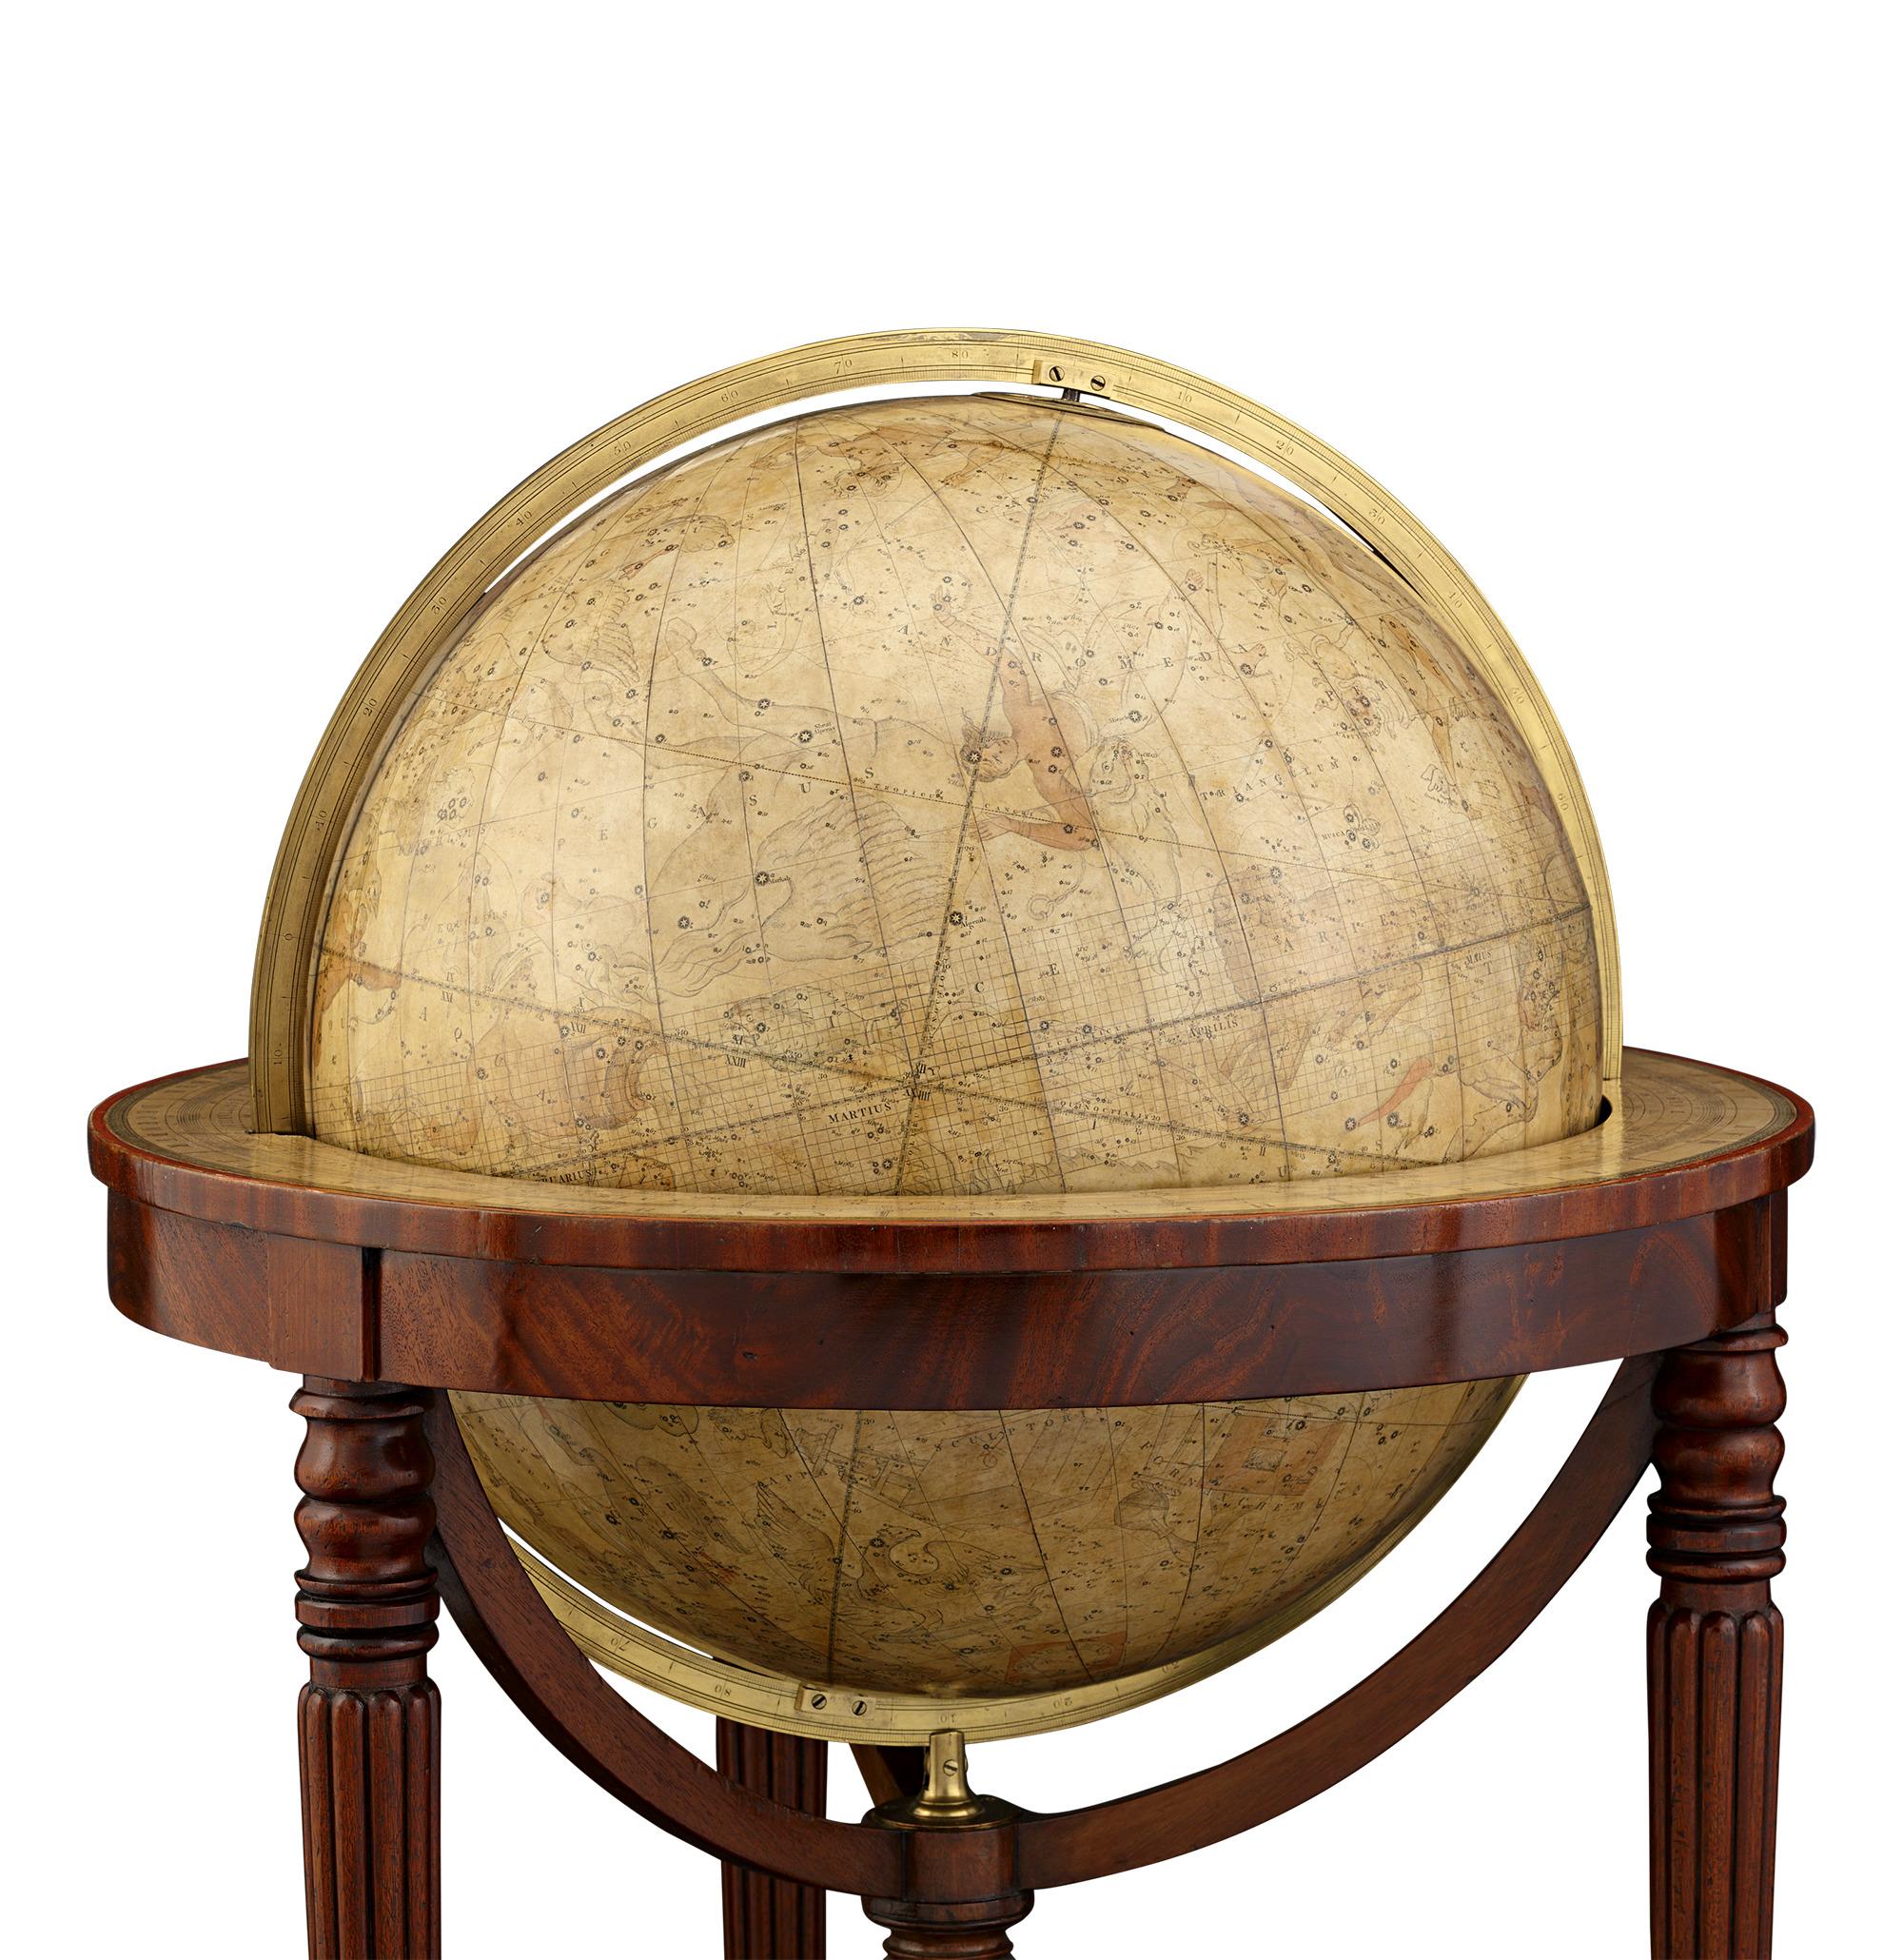 Regency William IV Terrestrial And Celestial Floor Globes By J. W. Cary For Sale